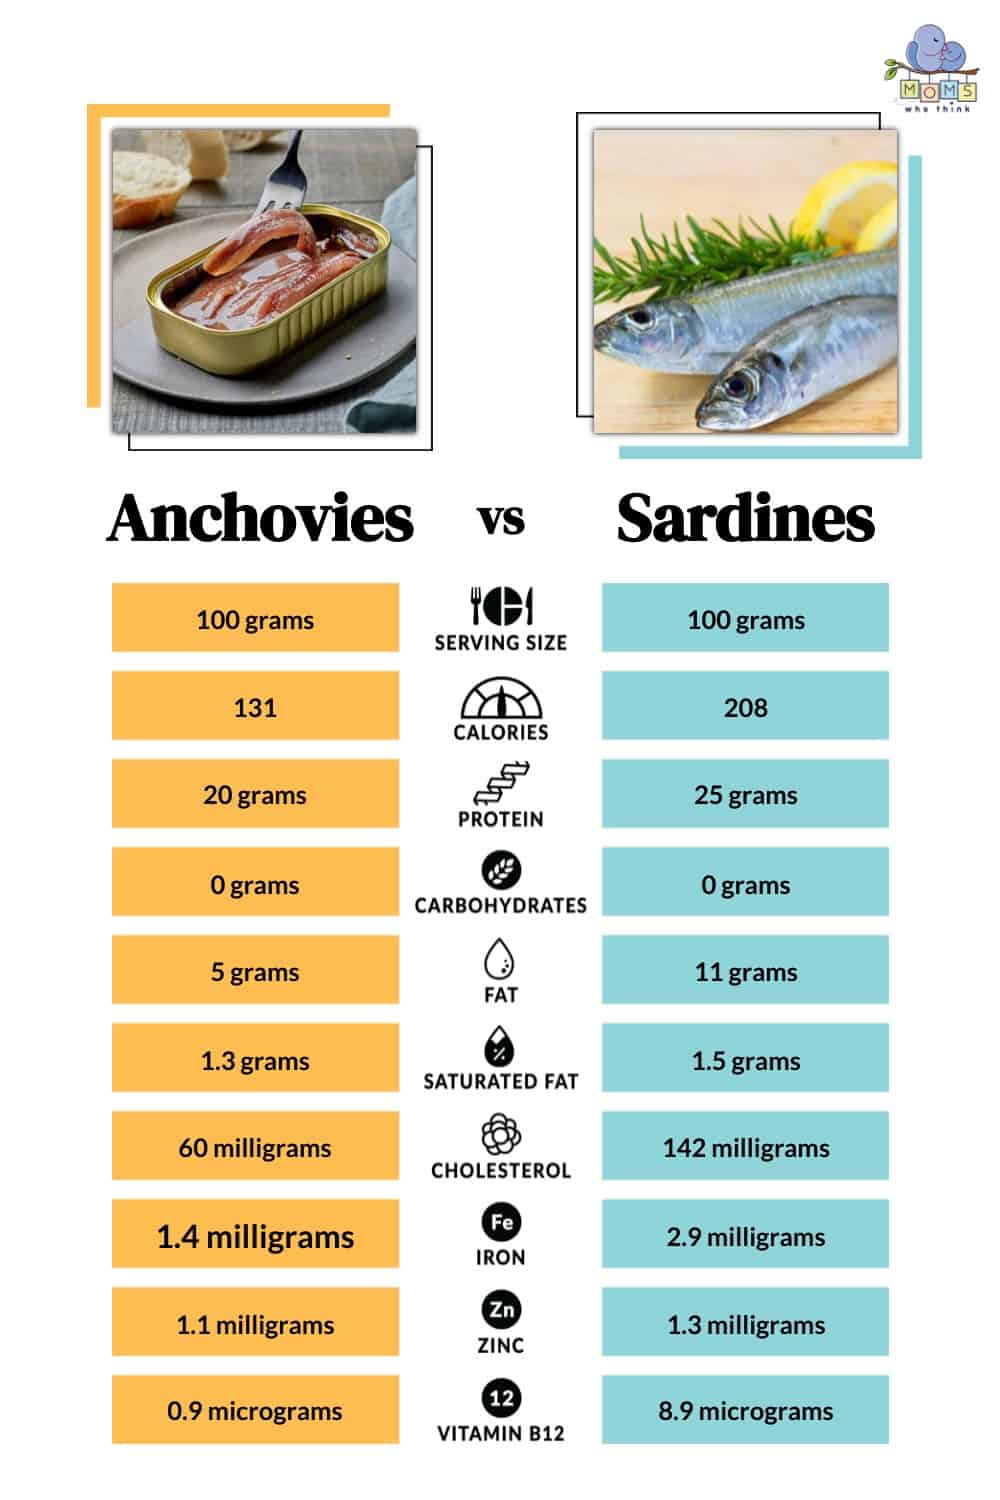 Anchovies vs Sardines Nutritional Facts